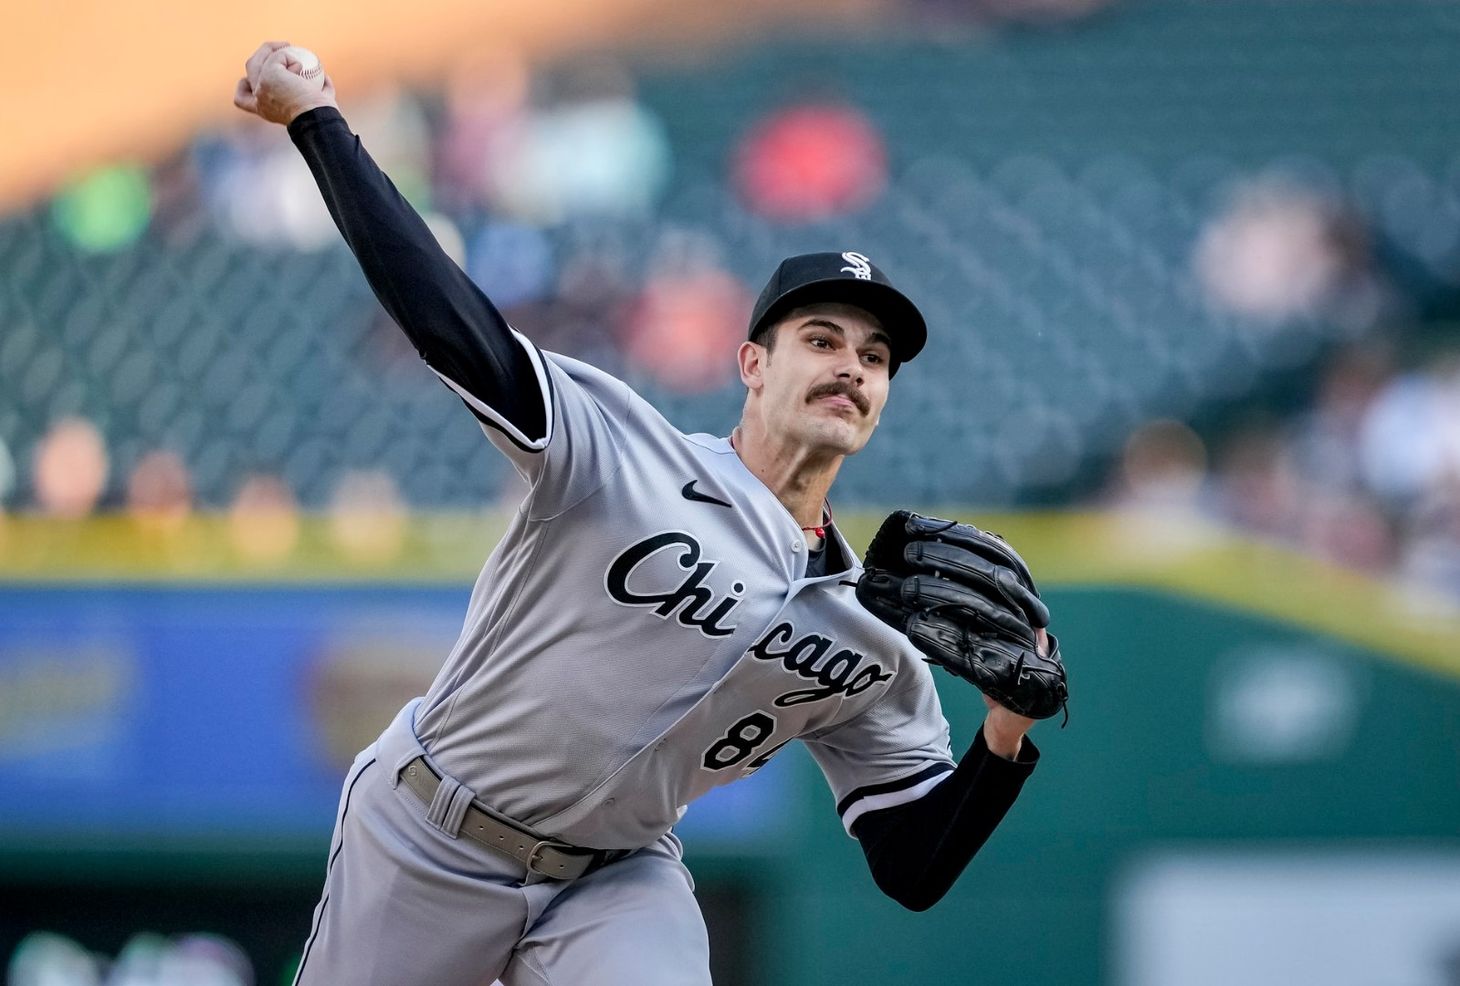 Cease improves to 10-0 against Tigers in 5-1 White Sox win